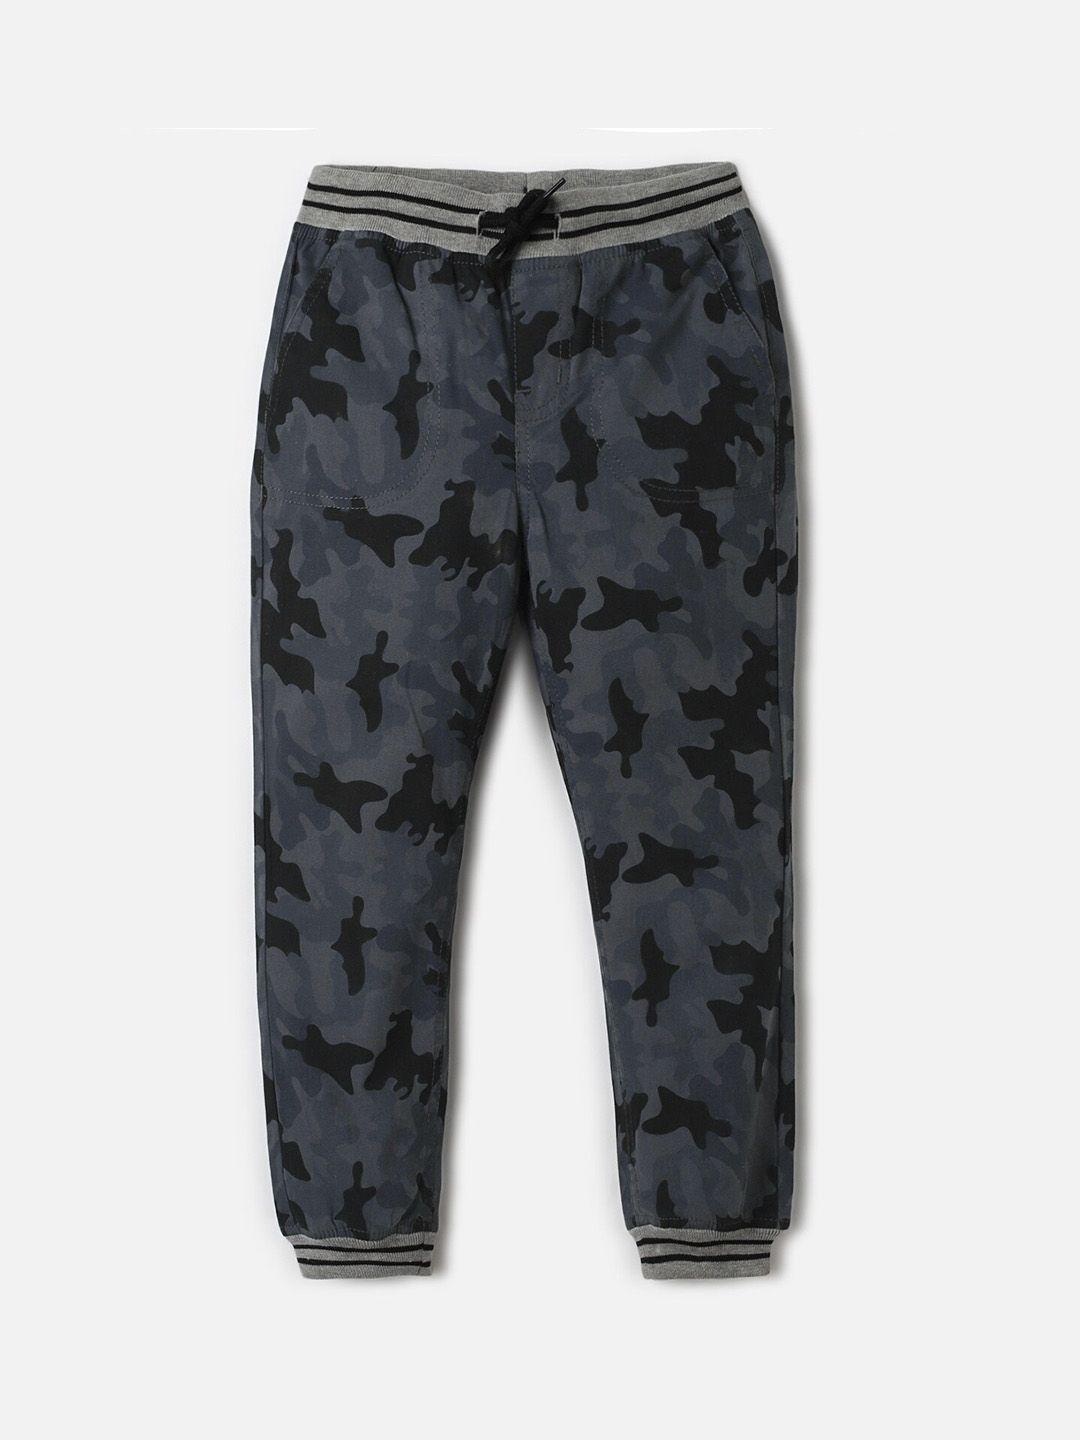 urbanmark-boys-camouflage-printed-pure-cotton-joggers